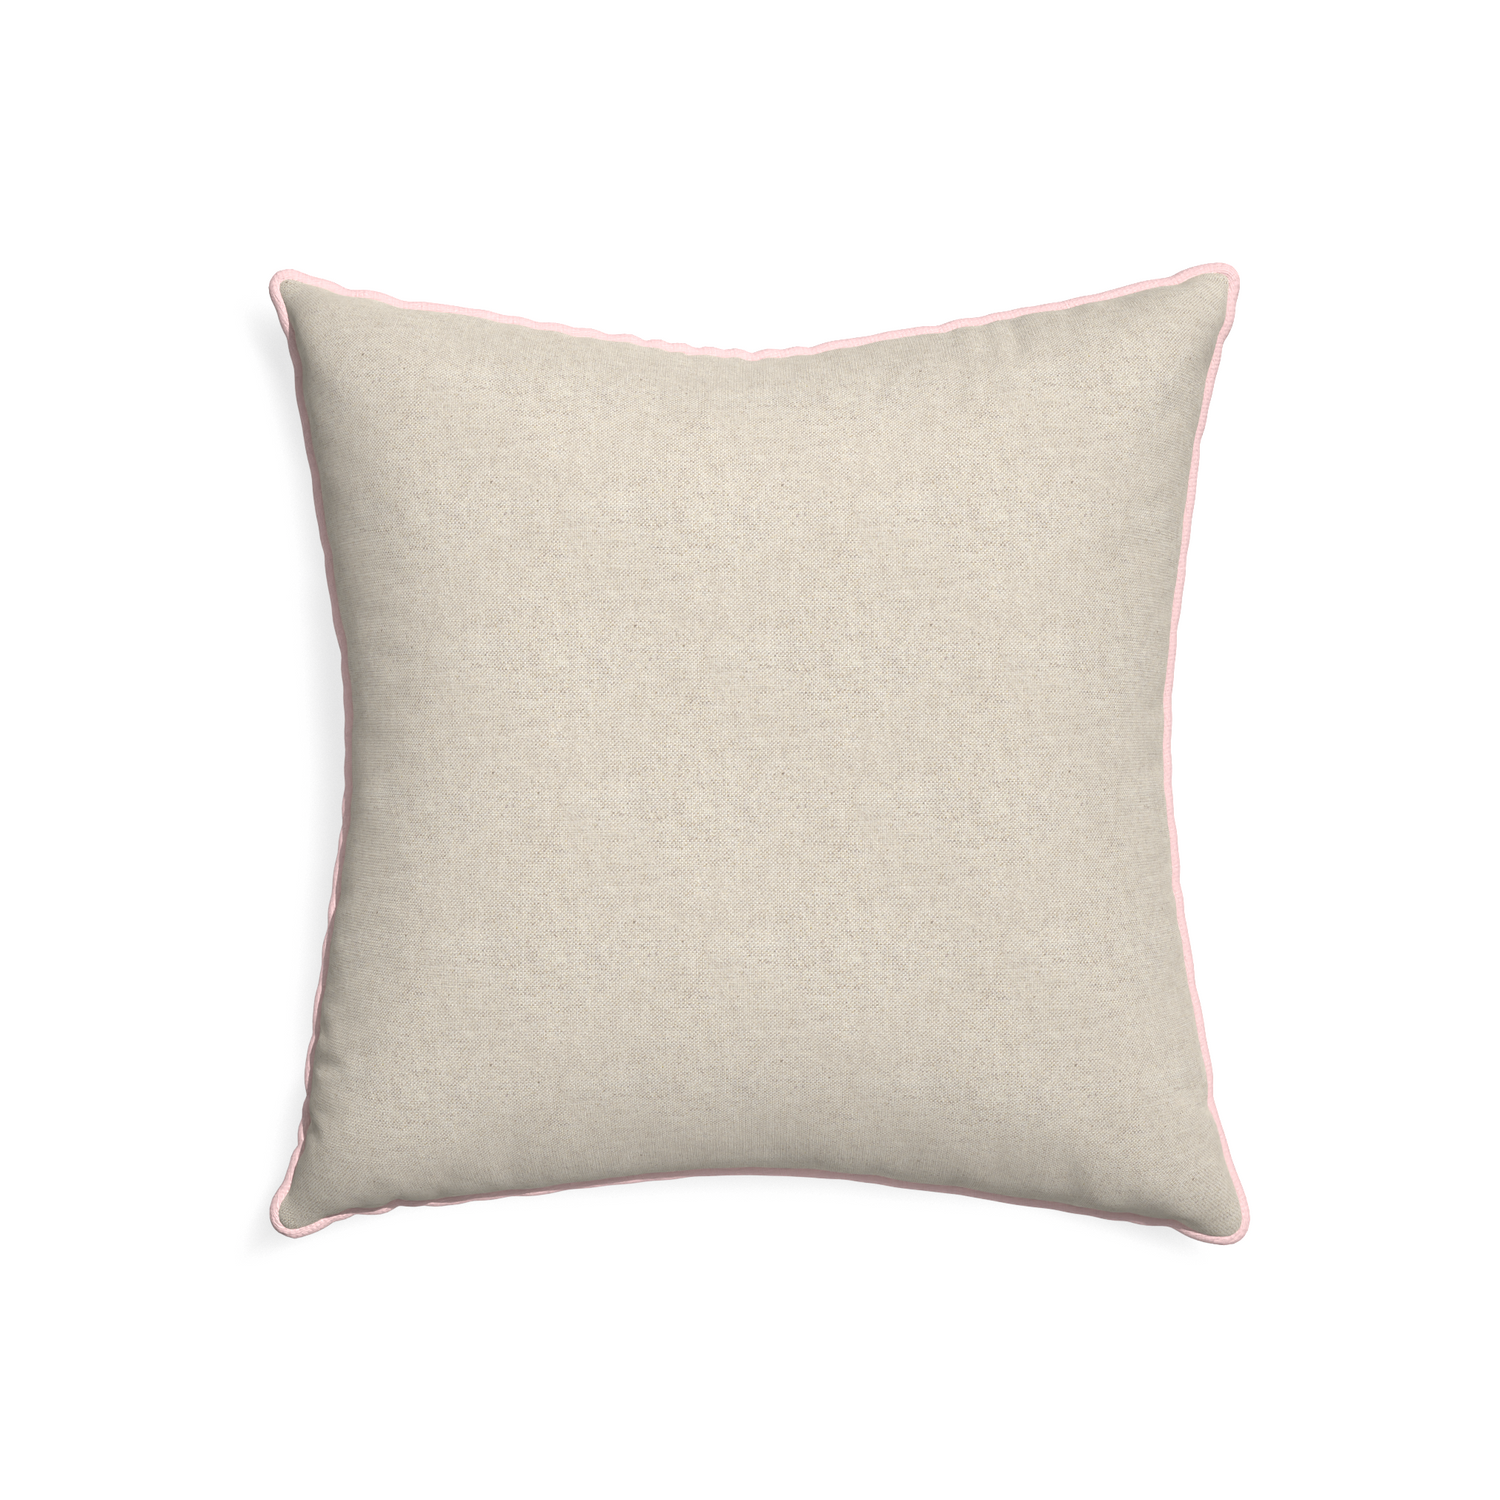 22-square oat custom light brownpillow with petal piping on white background